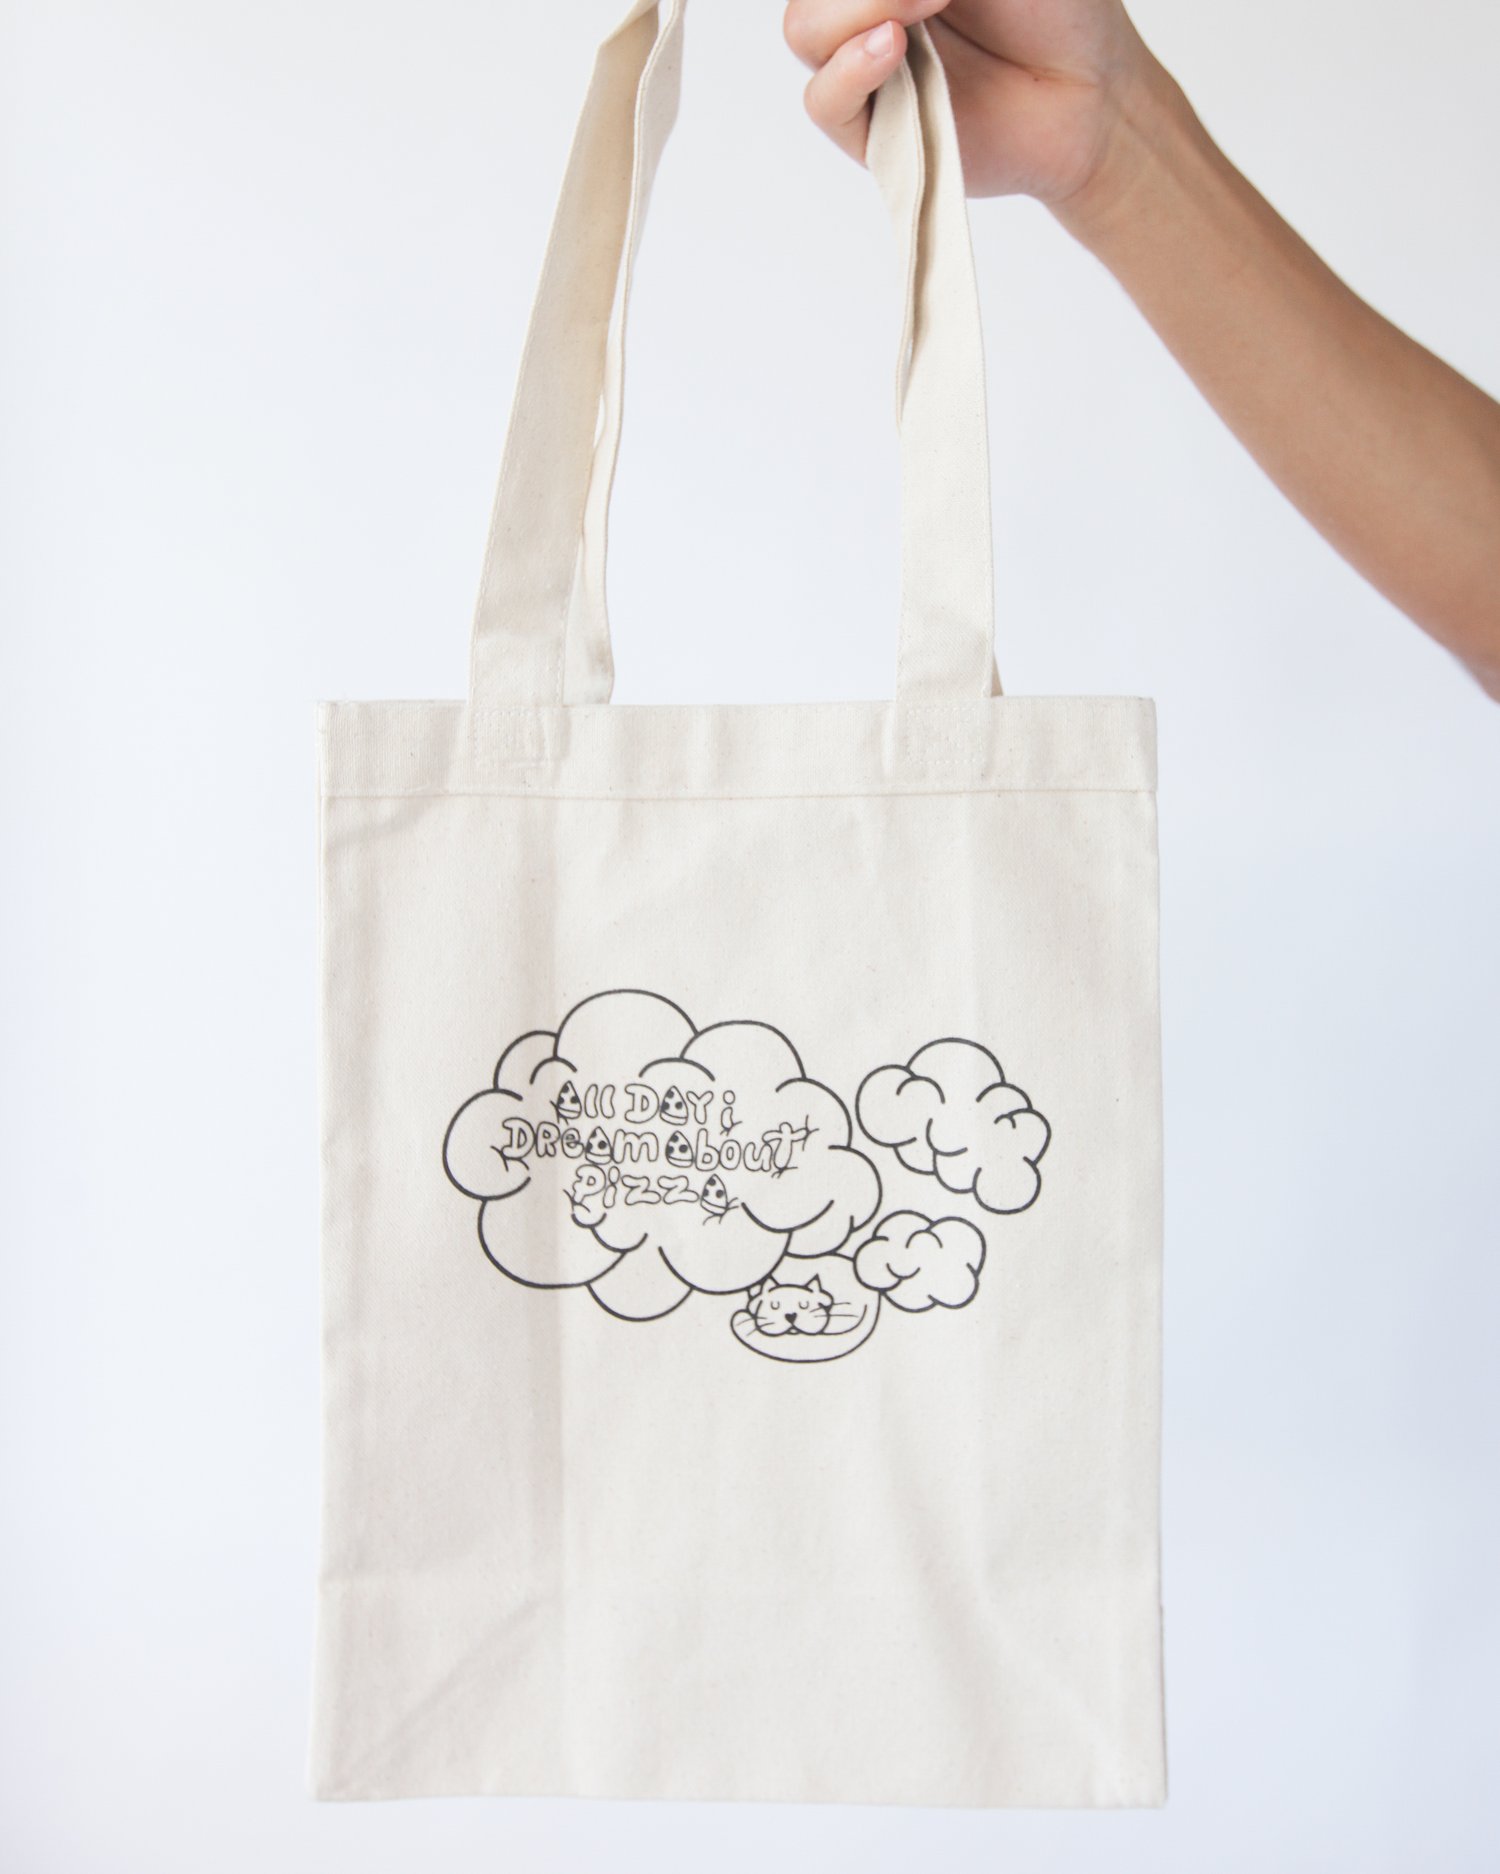 Image of Dreamin tote